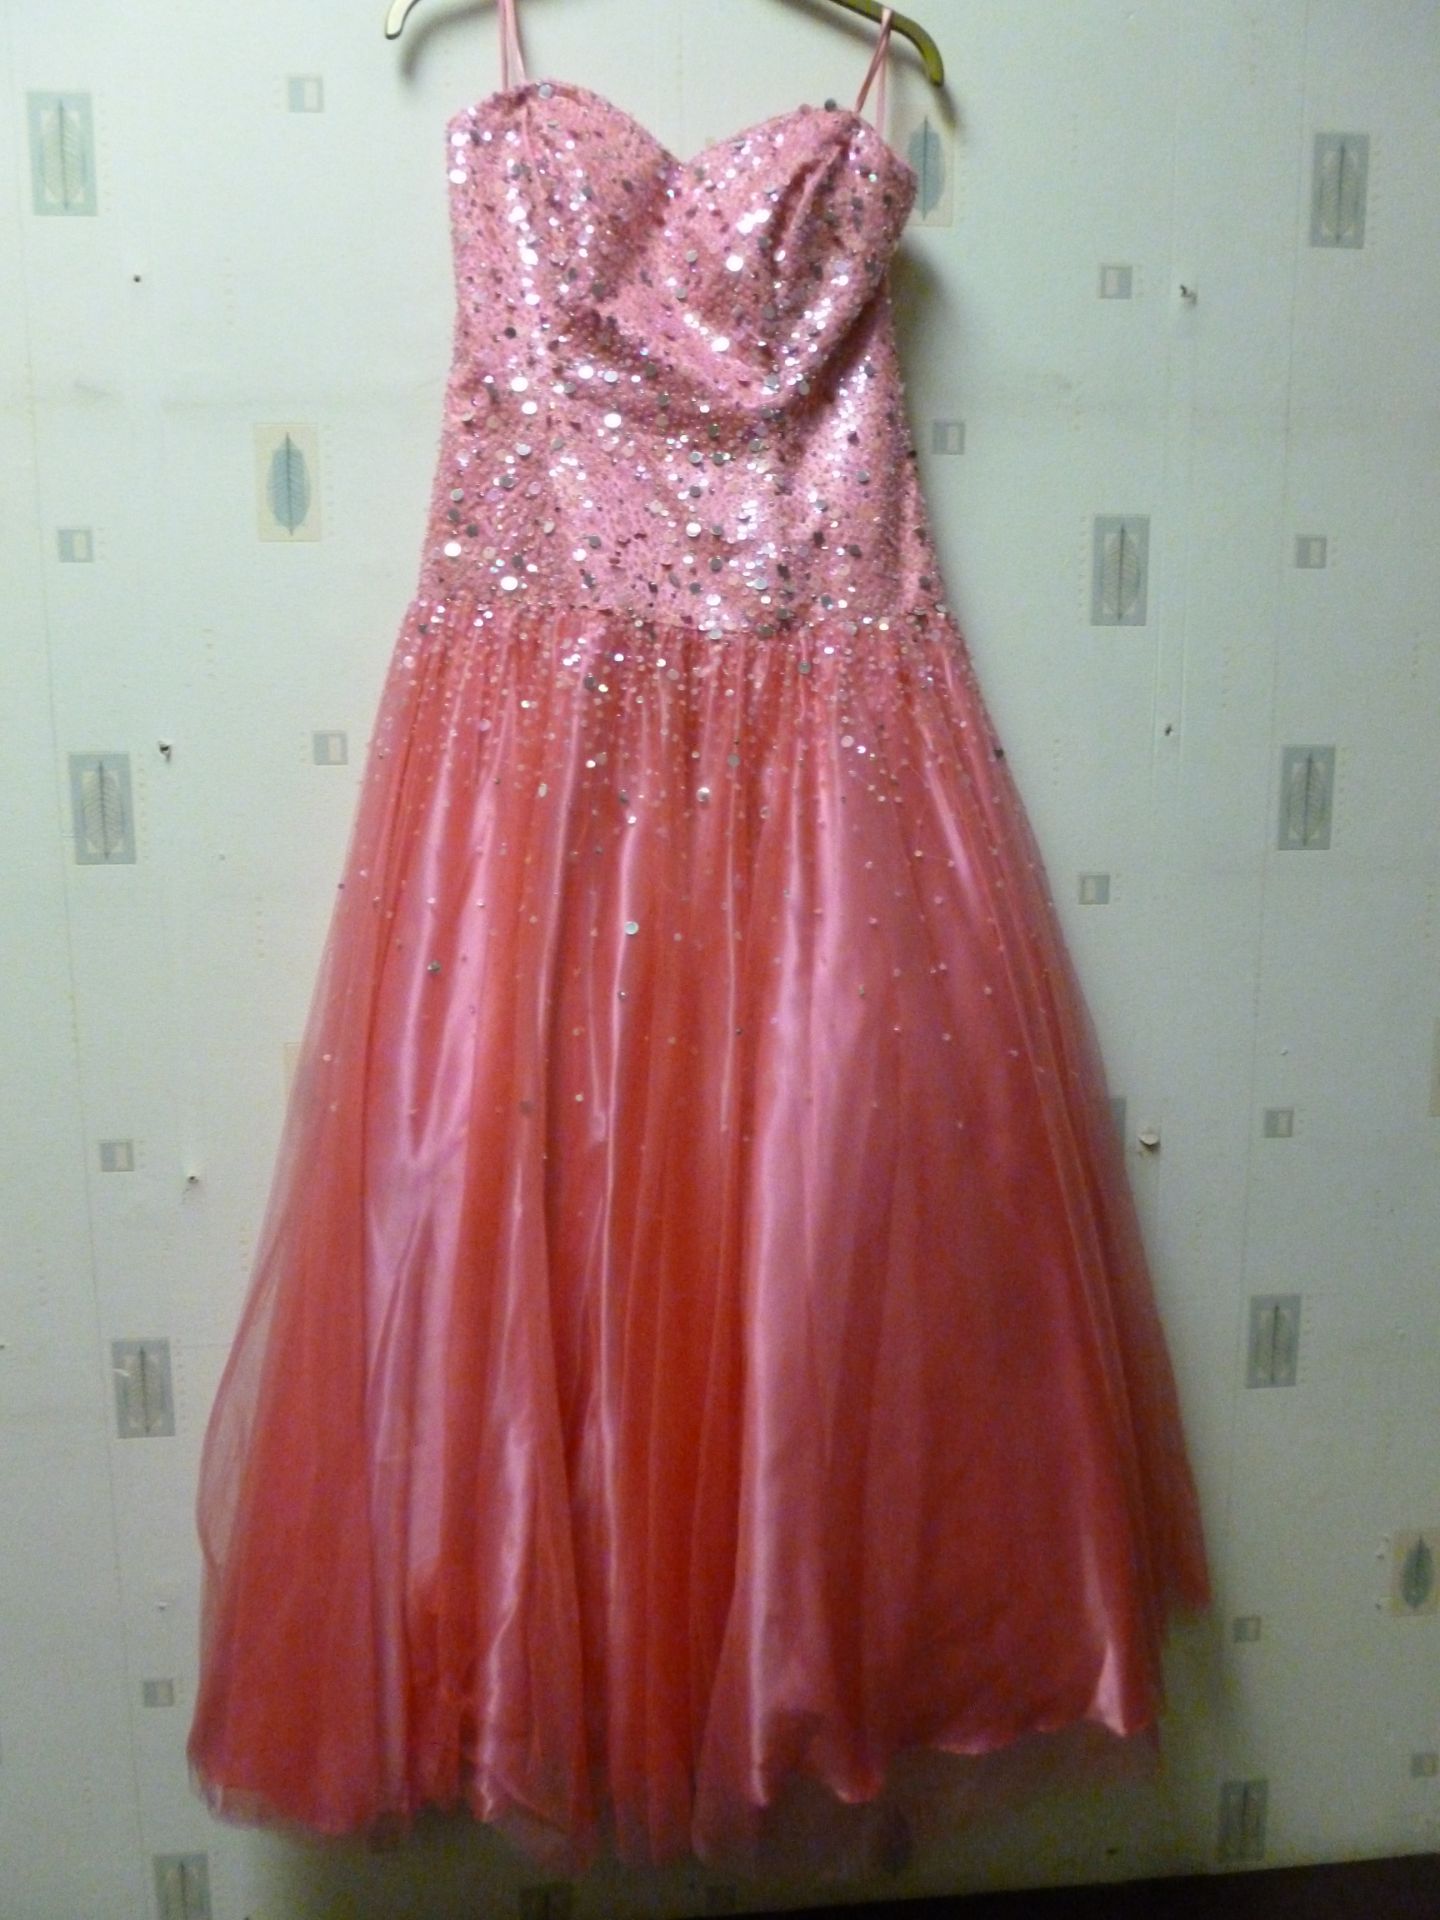 Alexia Designs Crystal Breeze Pink Prom dress with Sequin Design, size 16 £350